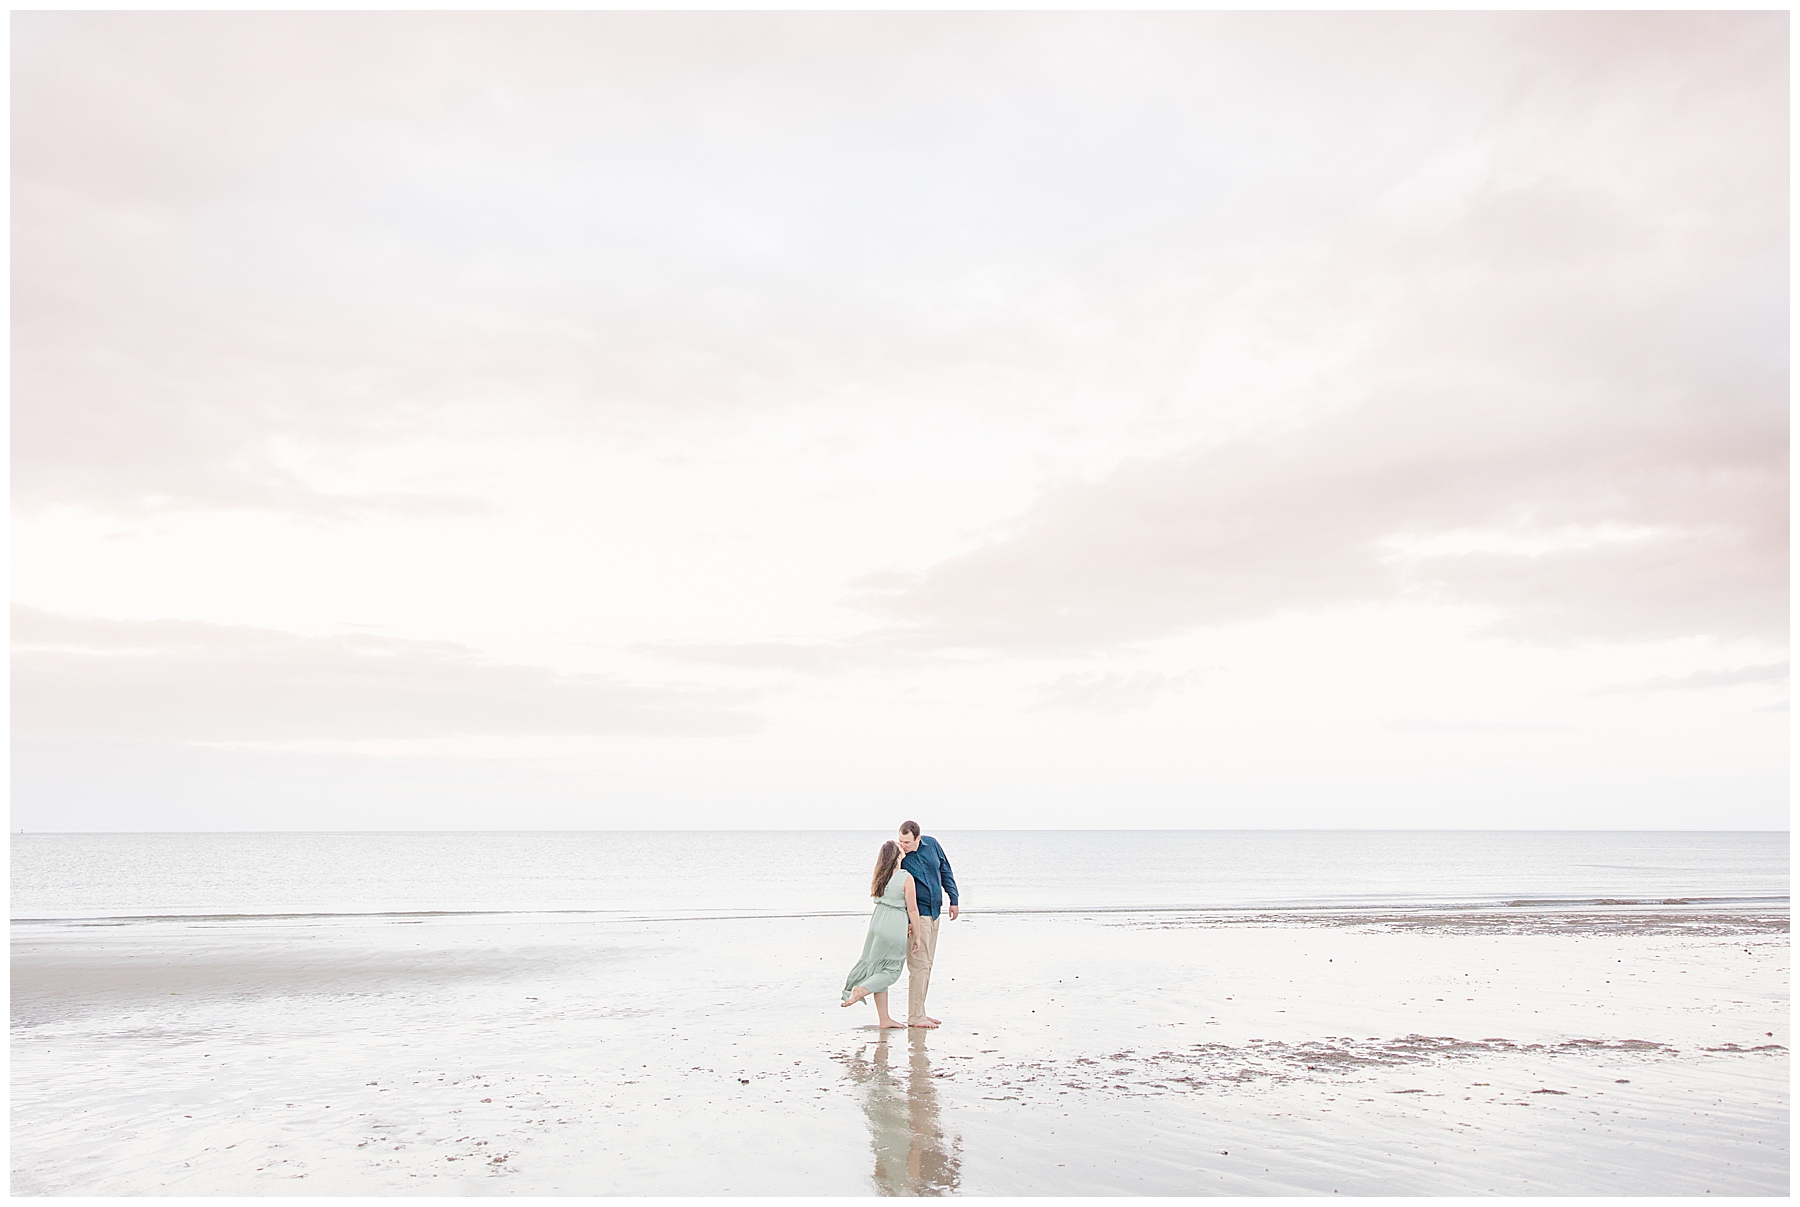 newly engaged walking on beach in Cape Cod MA during engagement photos